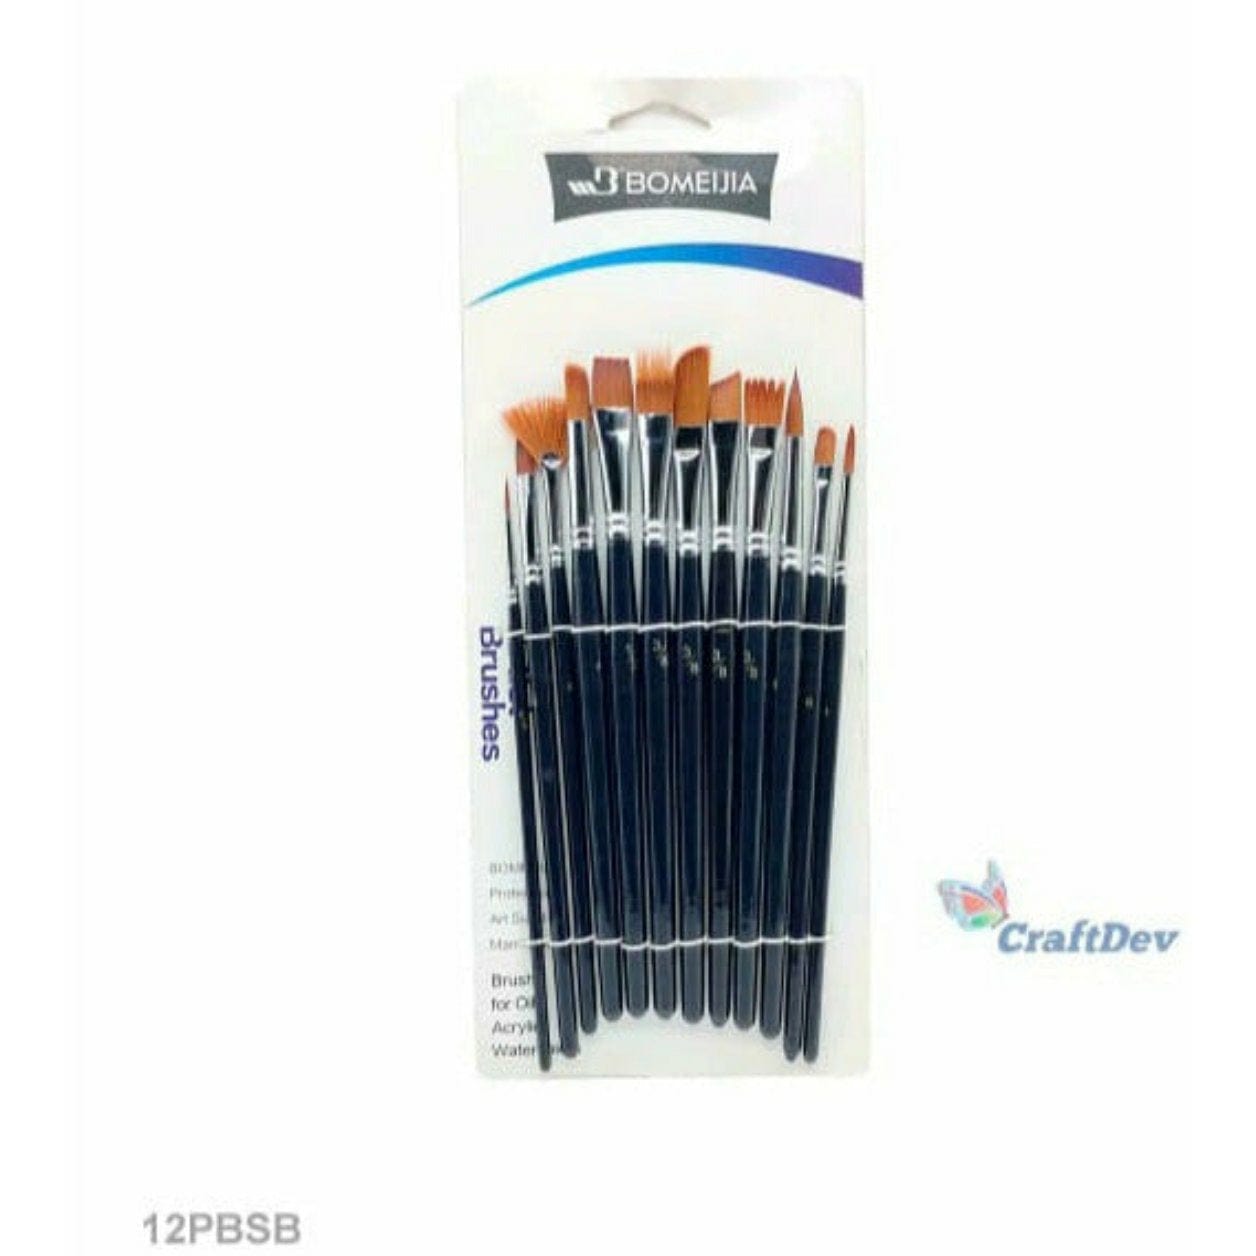 Value Paint Brushes for Kids  Value painting, Block painting